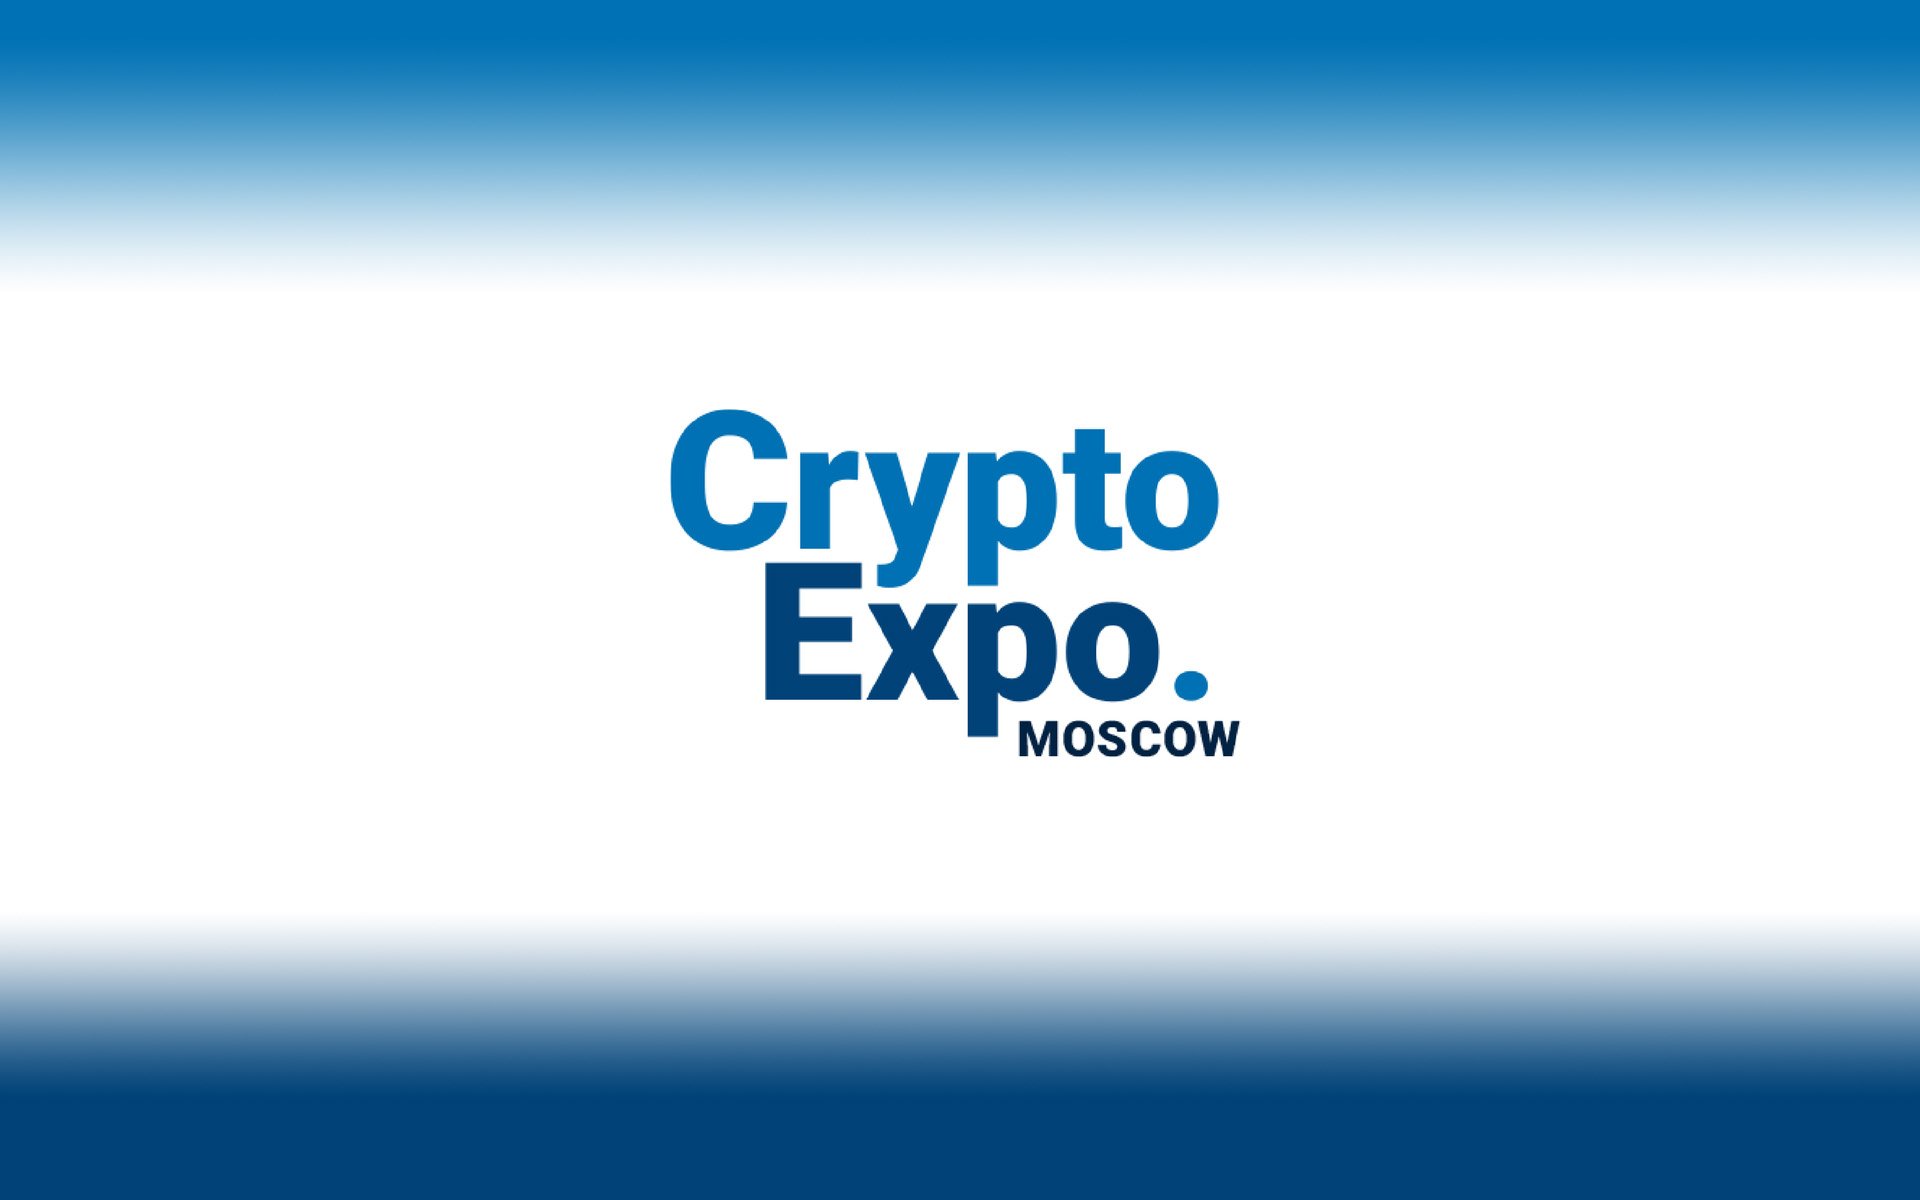 Moscow Opens the Doors of the Mysterious World of Blockchain as Crypto Expo Moscow Goes Live in May 2018